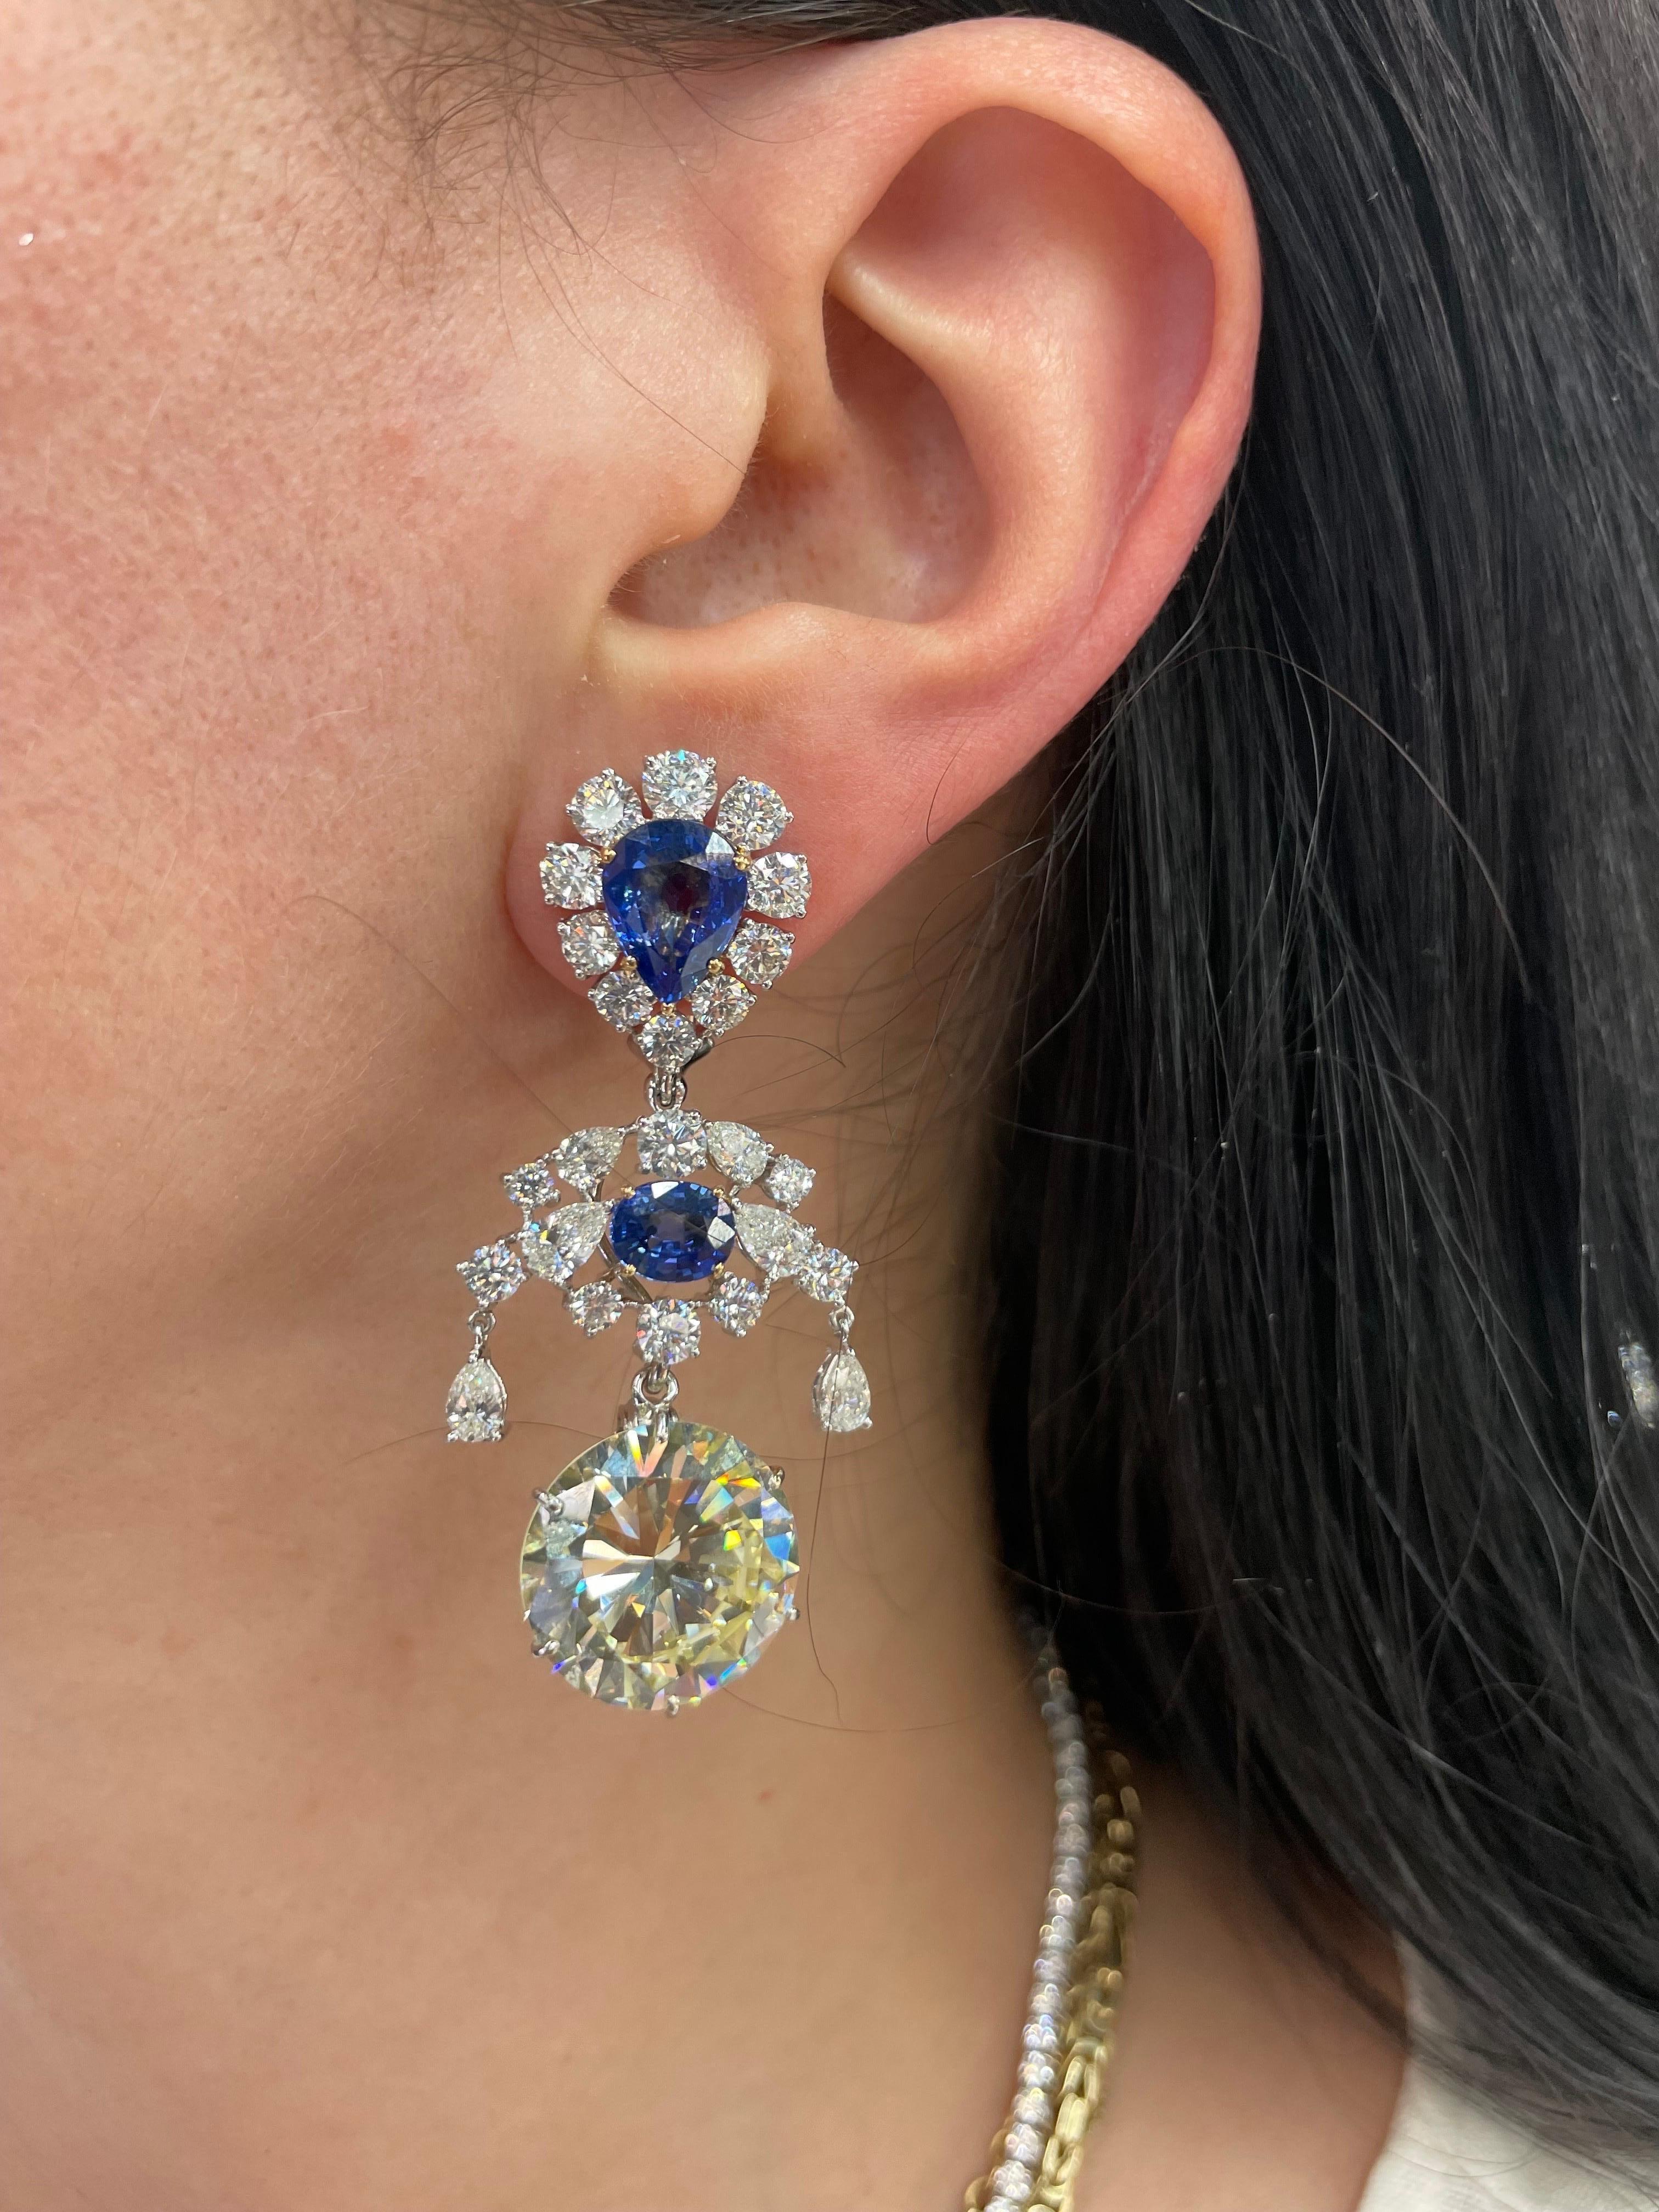 GIA Certified drop earrings featuring two Round Brilliants weighing each 15.08 Carats with a top design of Pear and Oval cut natural Sri Lanka Sapphires, in 18 karat white gold. 
Pear Shape Sapphires approximately 5 carats each 
Oval Shape Sapphires